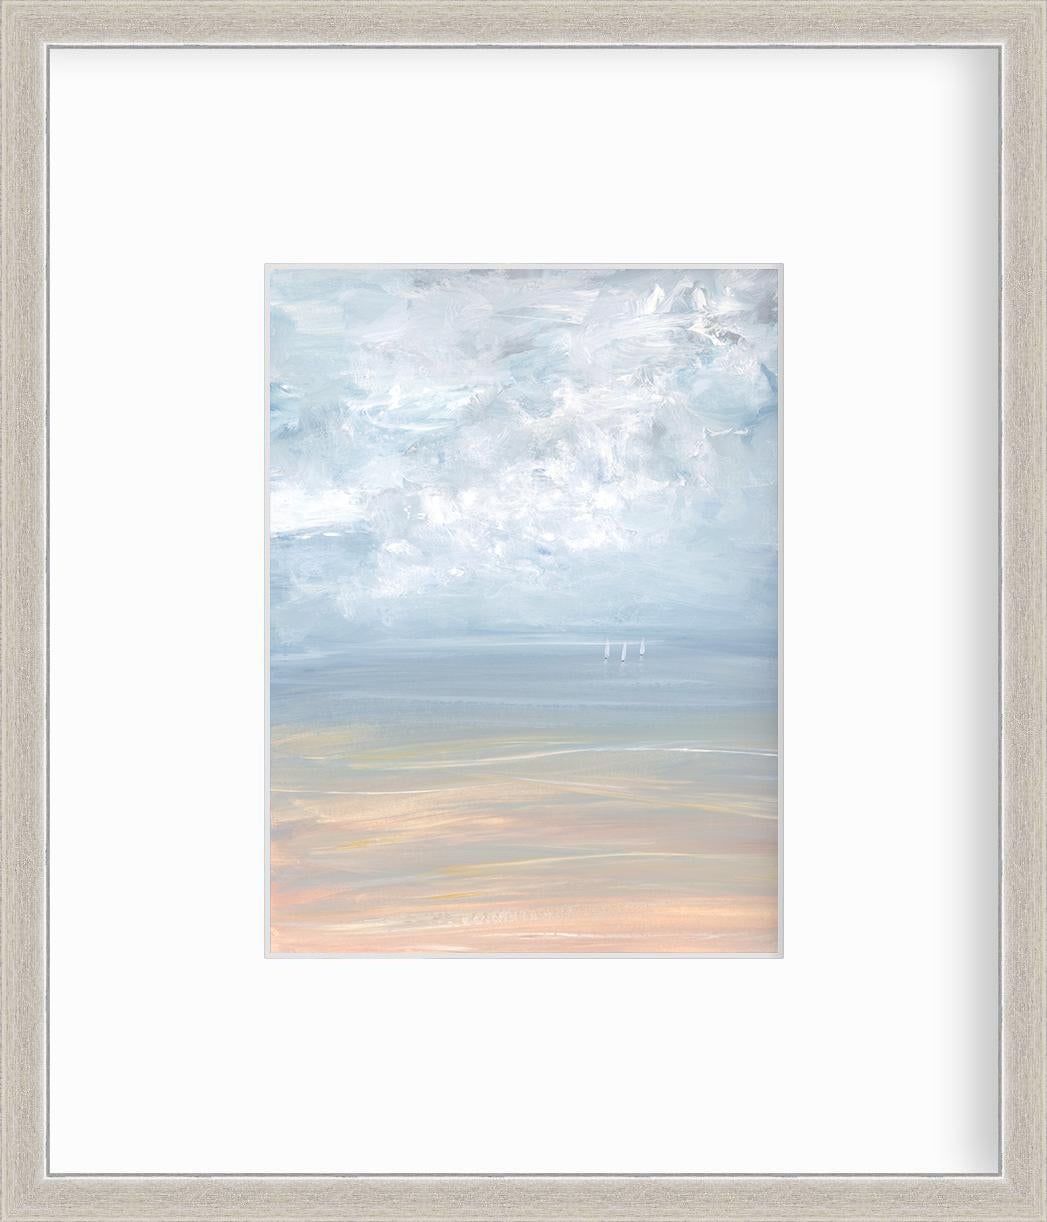 This contemporary seascape limited edition print by S.C. Aldo features a coastal scene with a light blue sky, textured abstract clouds and three small sailboats along the horizon. 

This limited edition print is an edition size of 195. Printed with